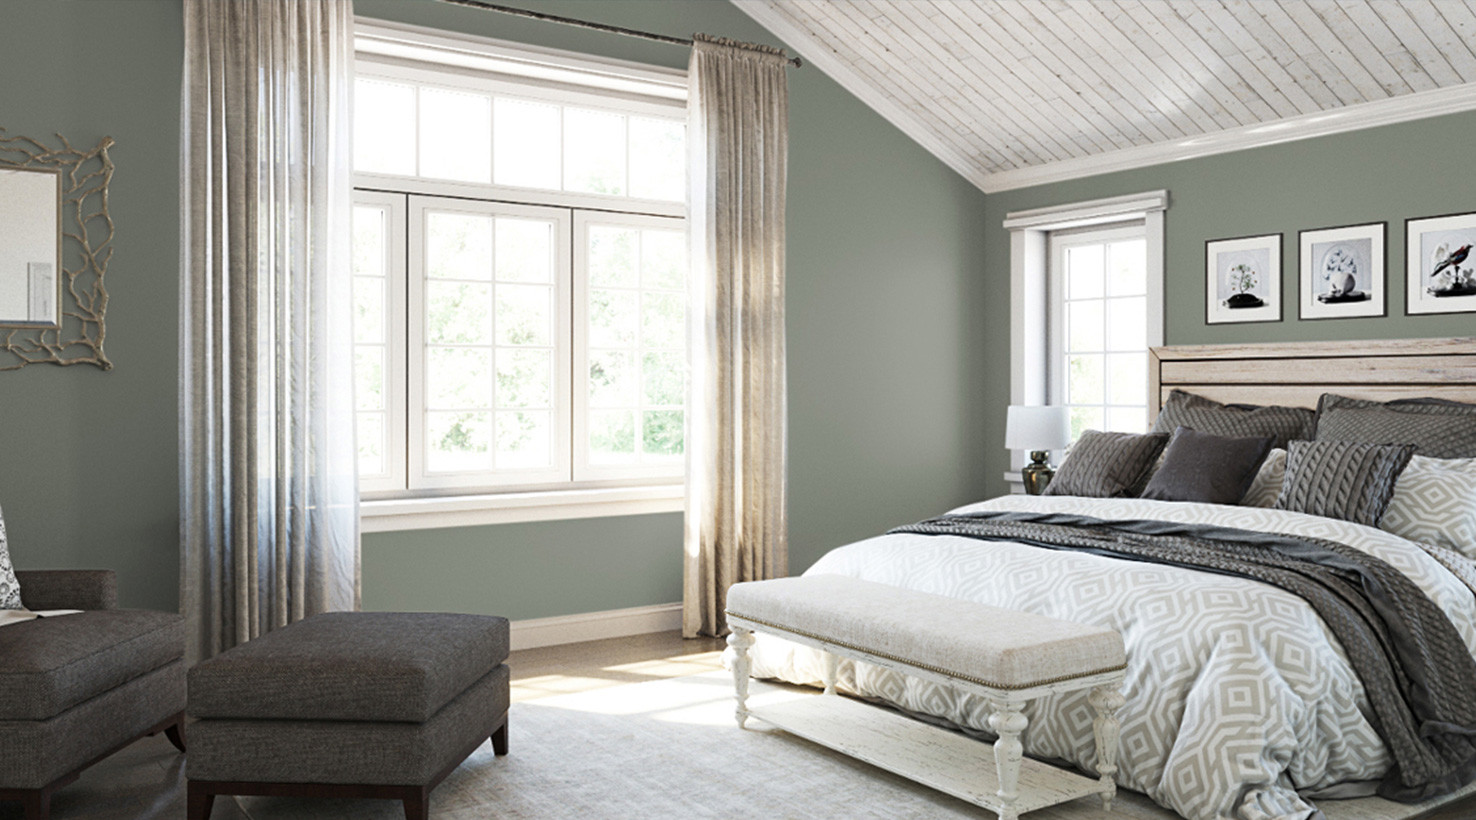 Popular Paint Colors For Bedrooms
 Bedroom Paint Color Ideas Inspiration Gallery